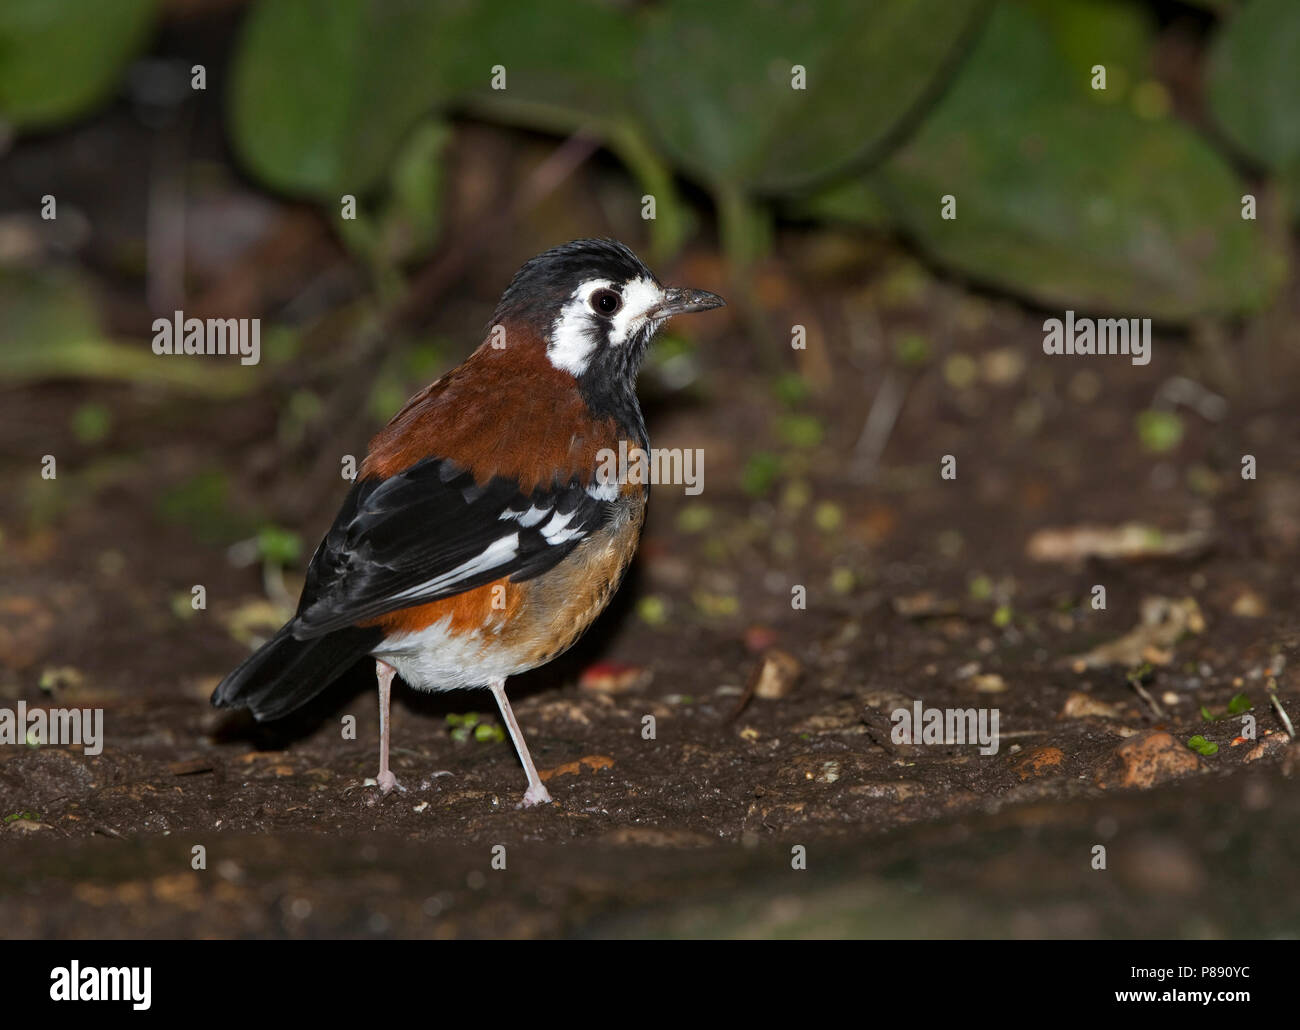 Chestnut-backed Thrush (Zoothera dohertyi), a ground thrush species endemic to Lombok, Timor and the Lesser Sunda Islands in Indonesia. Captive bird. Stock Photo